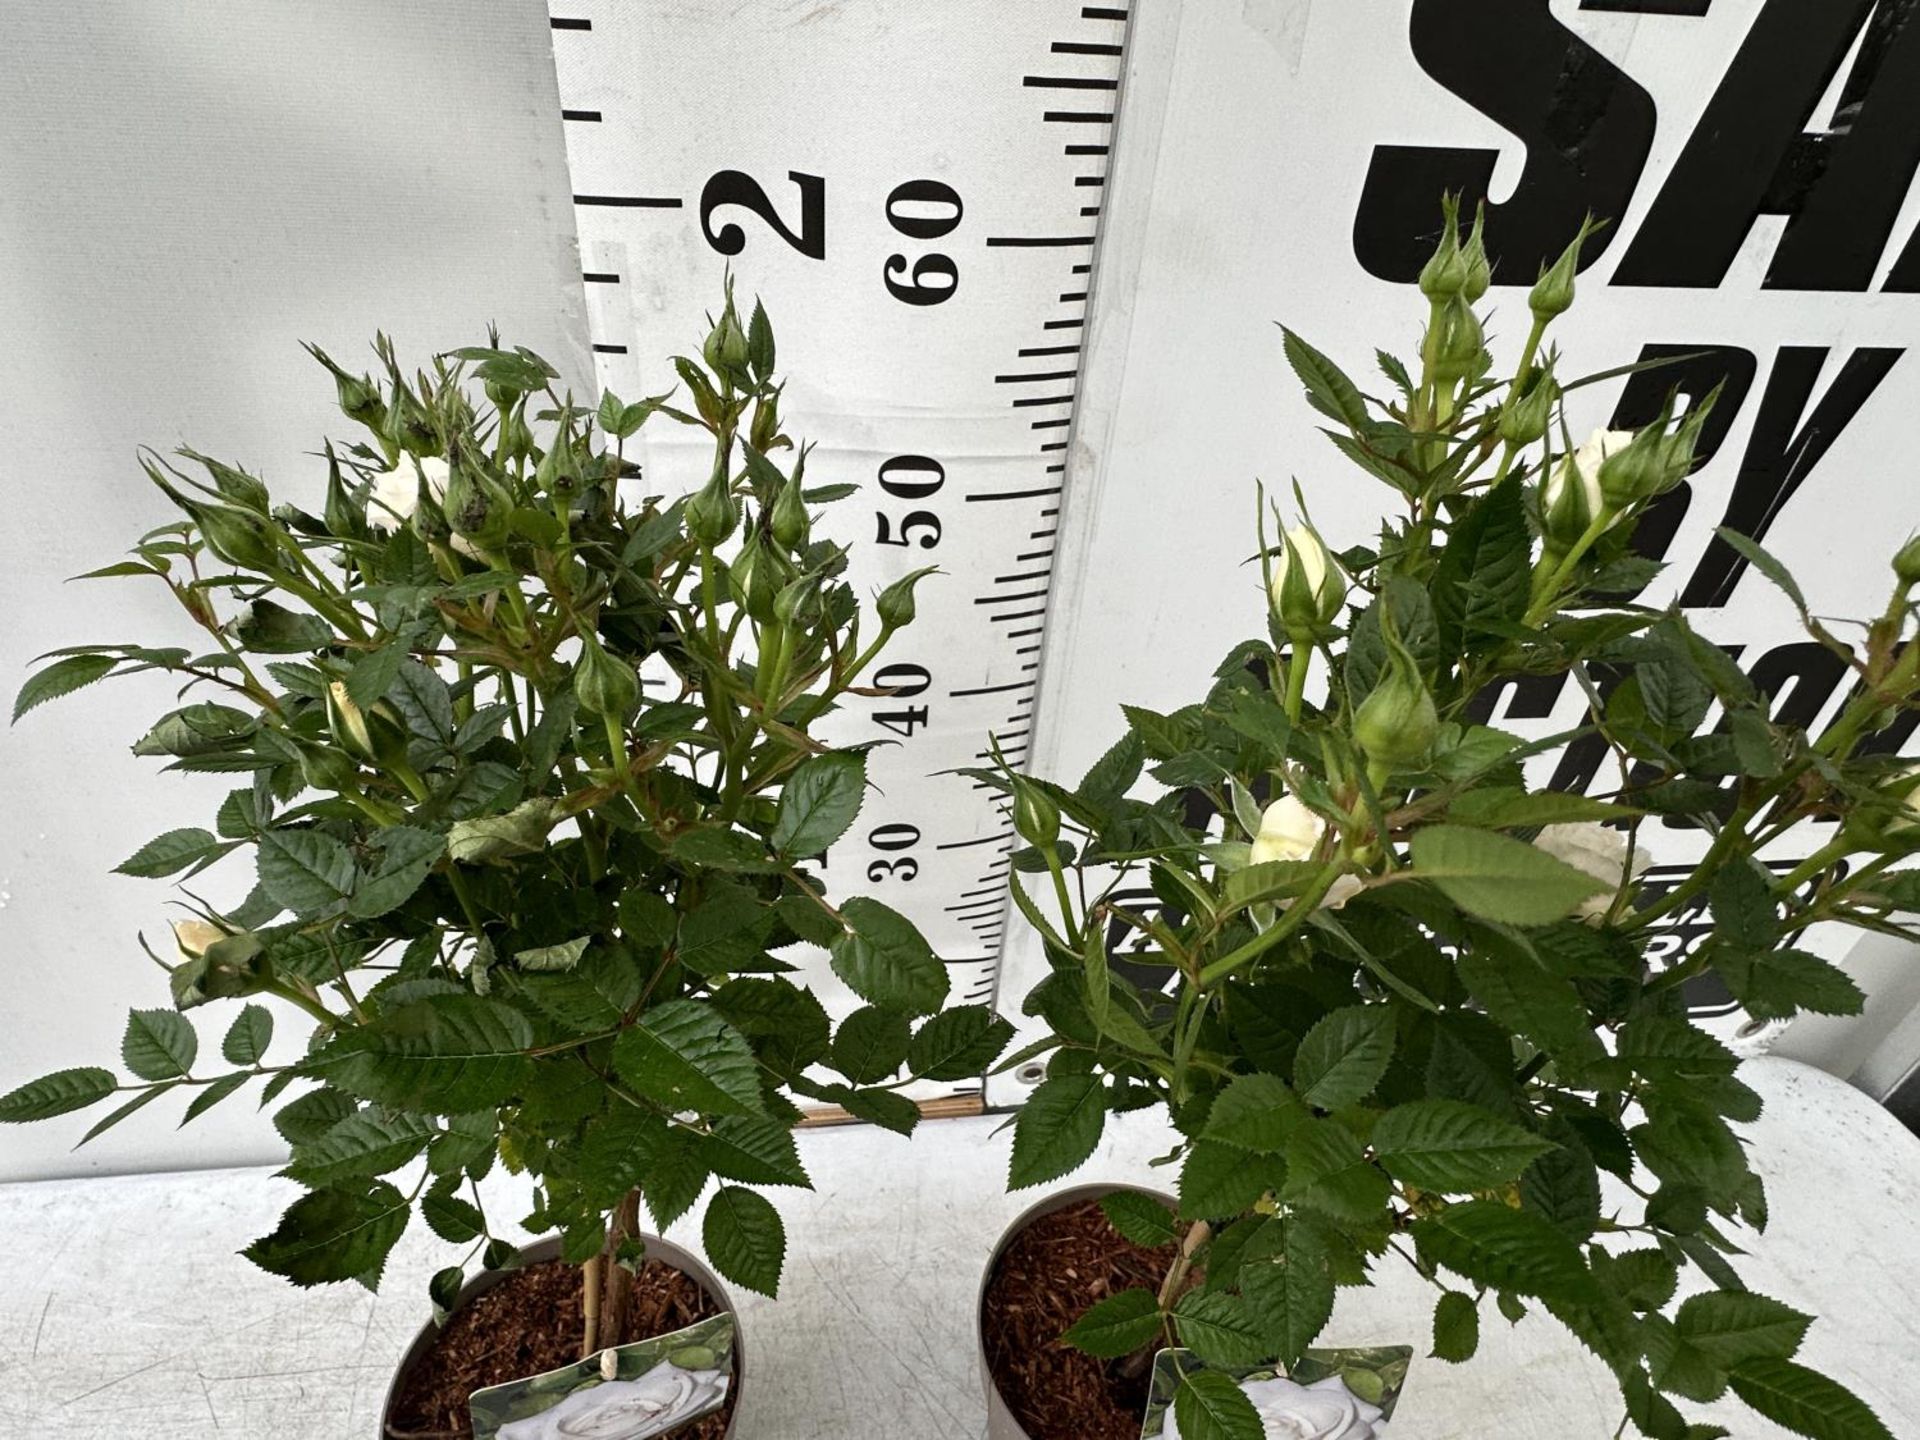 A PAIR STANDARD ROSES ROSA ROYAL WHITE IN C-2 POTS HEIGHT 70CM TO BE SOLD FOR THE PAIR PLUS VAT - Image 2 of 4